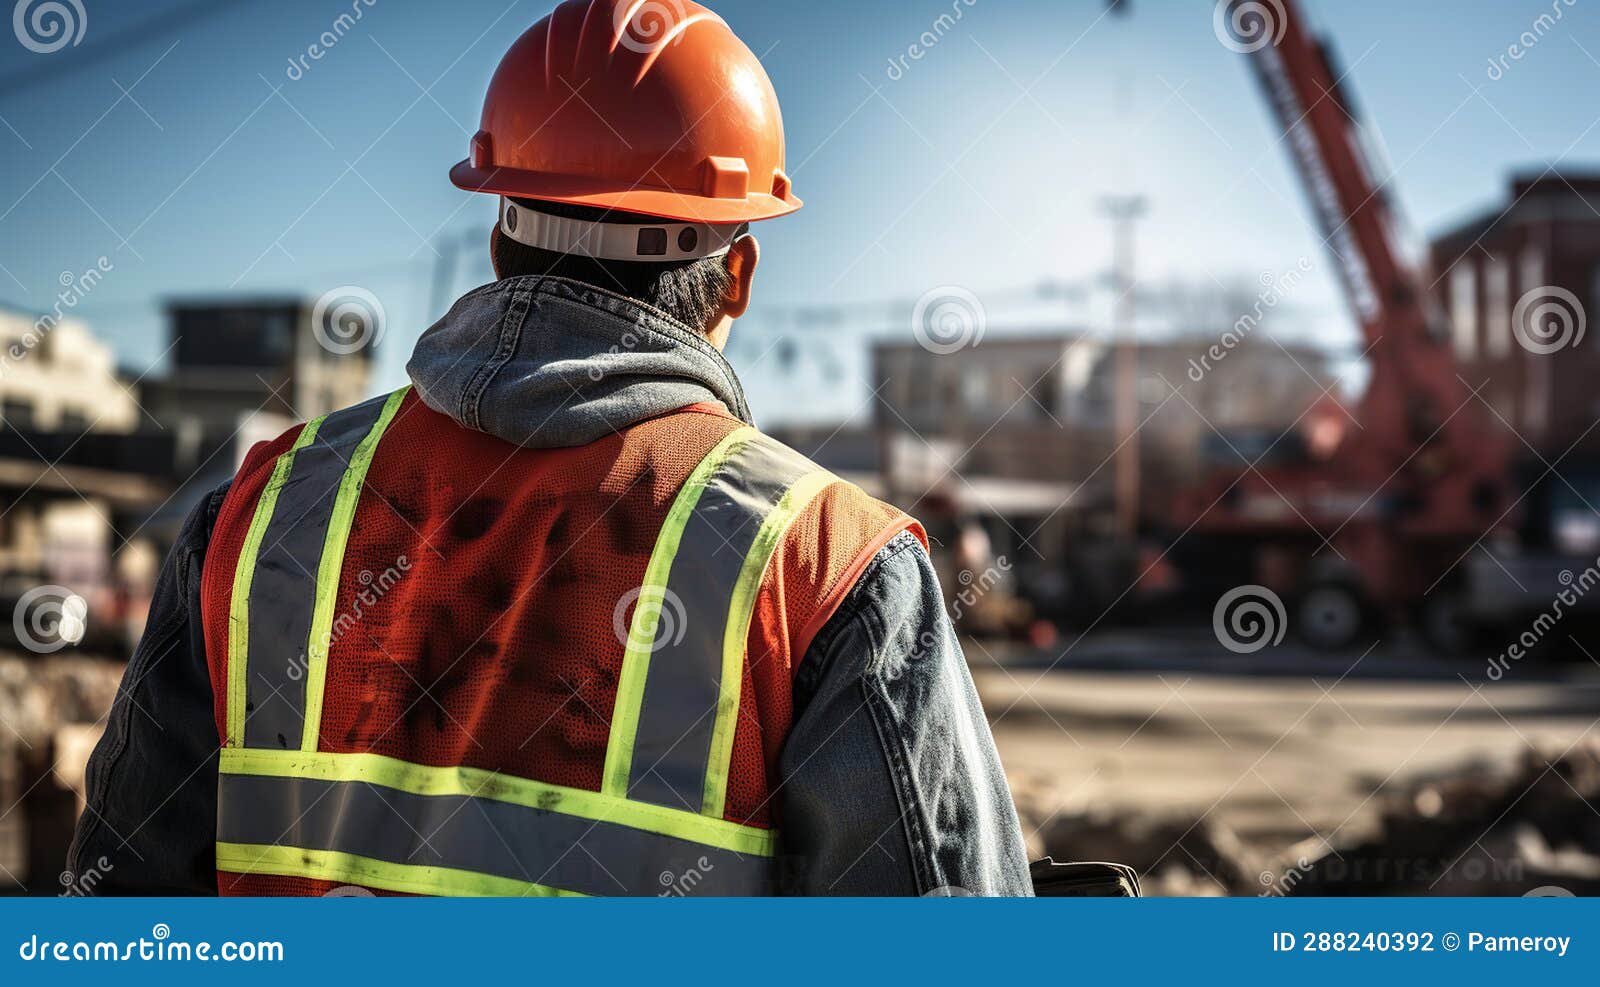 the red-hatted worker orchestrating construction's grand choreography